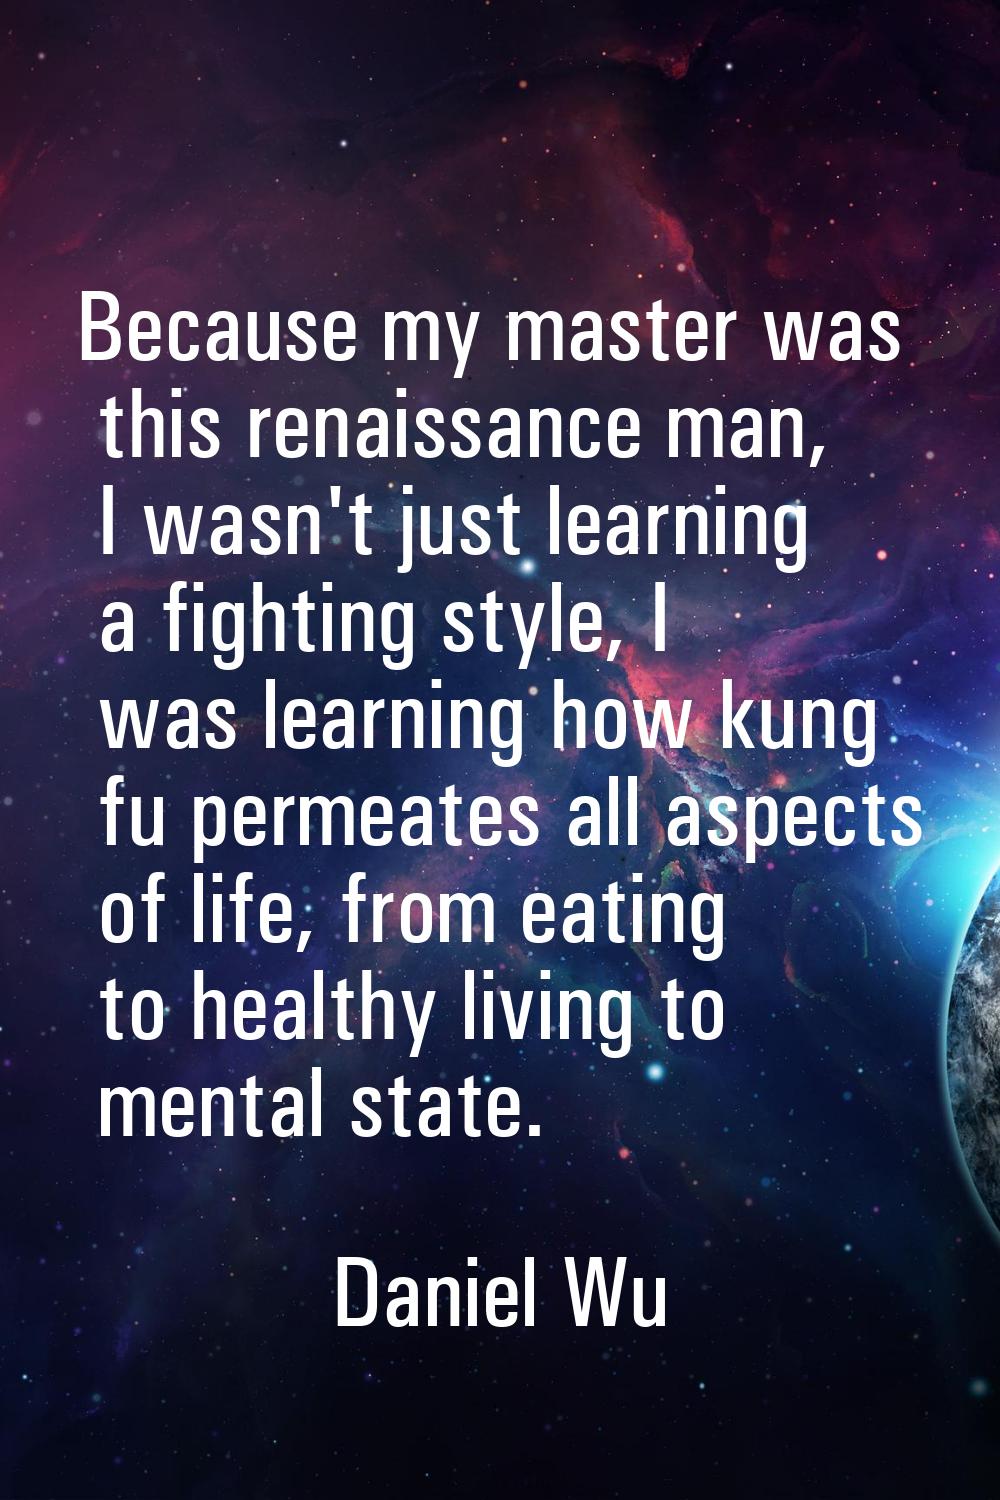 Because my master was this renaissance man, I wasn't just learning a fighting style, I was learning